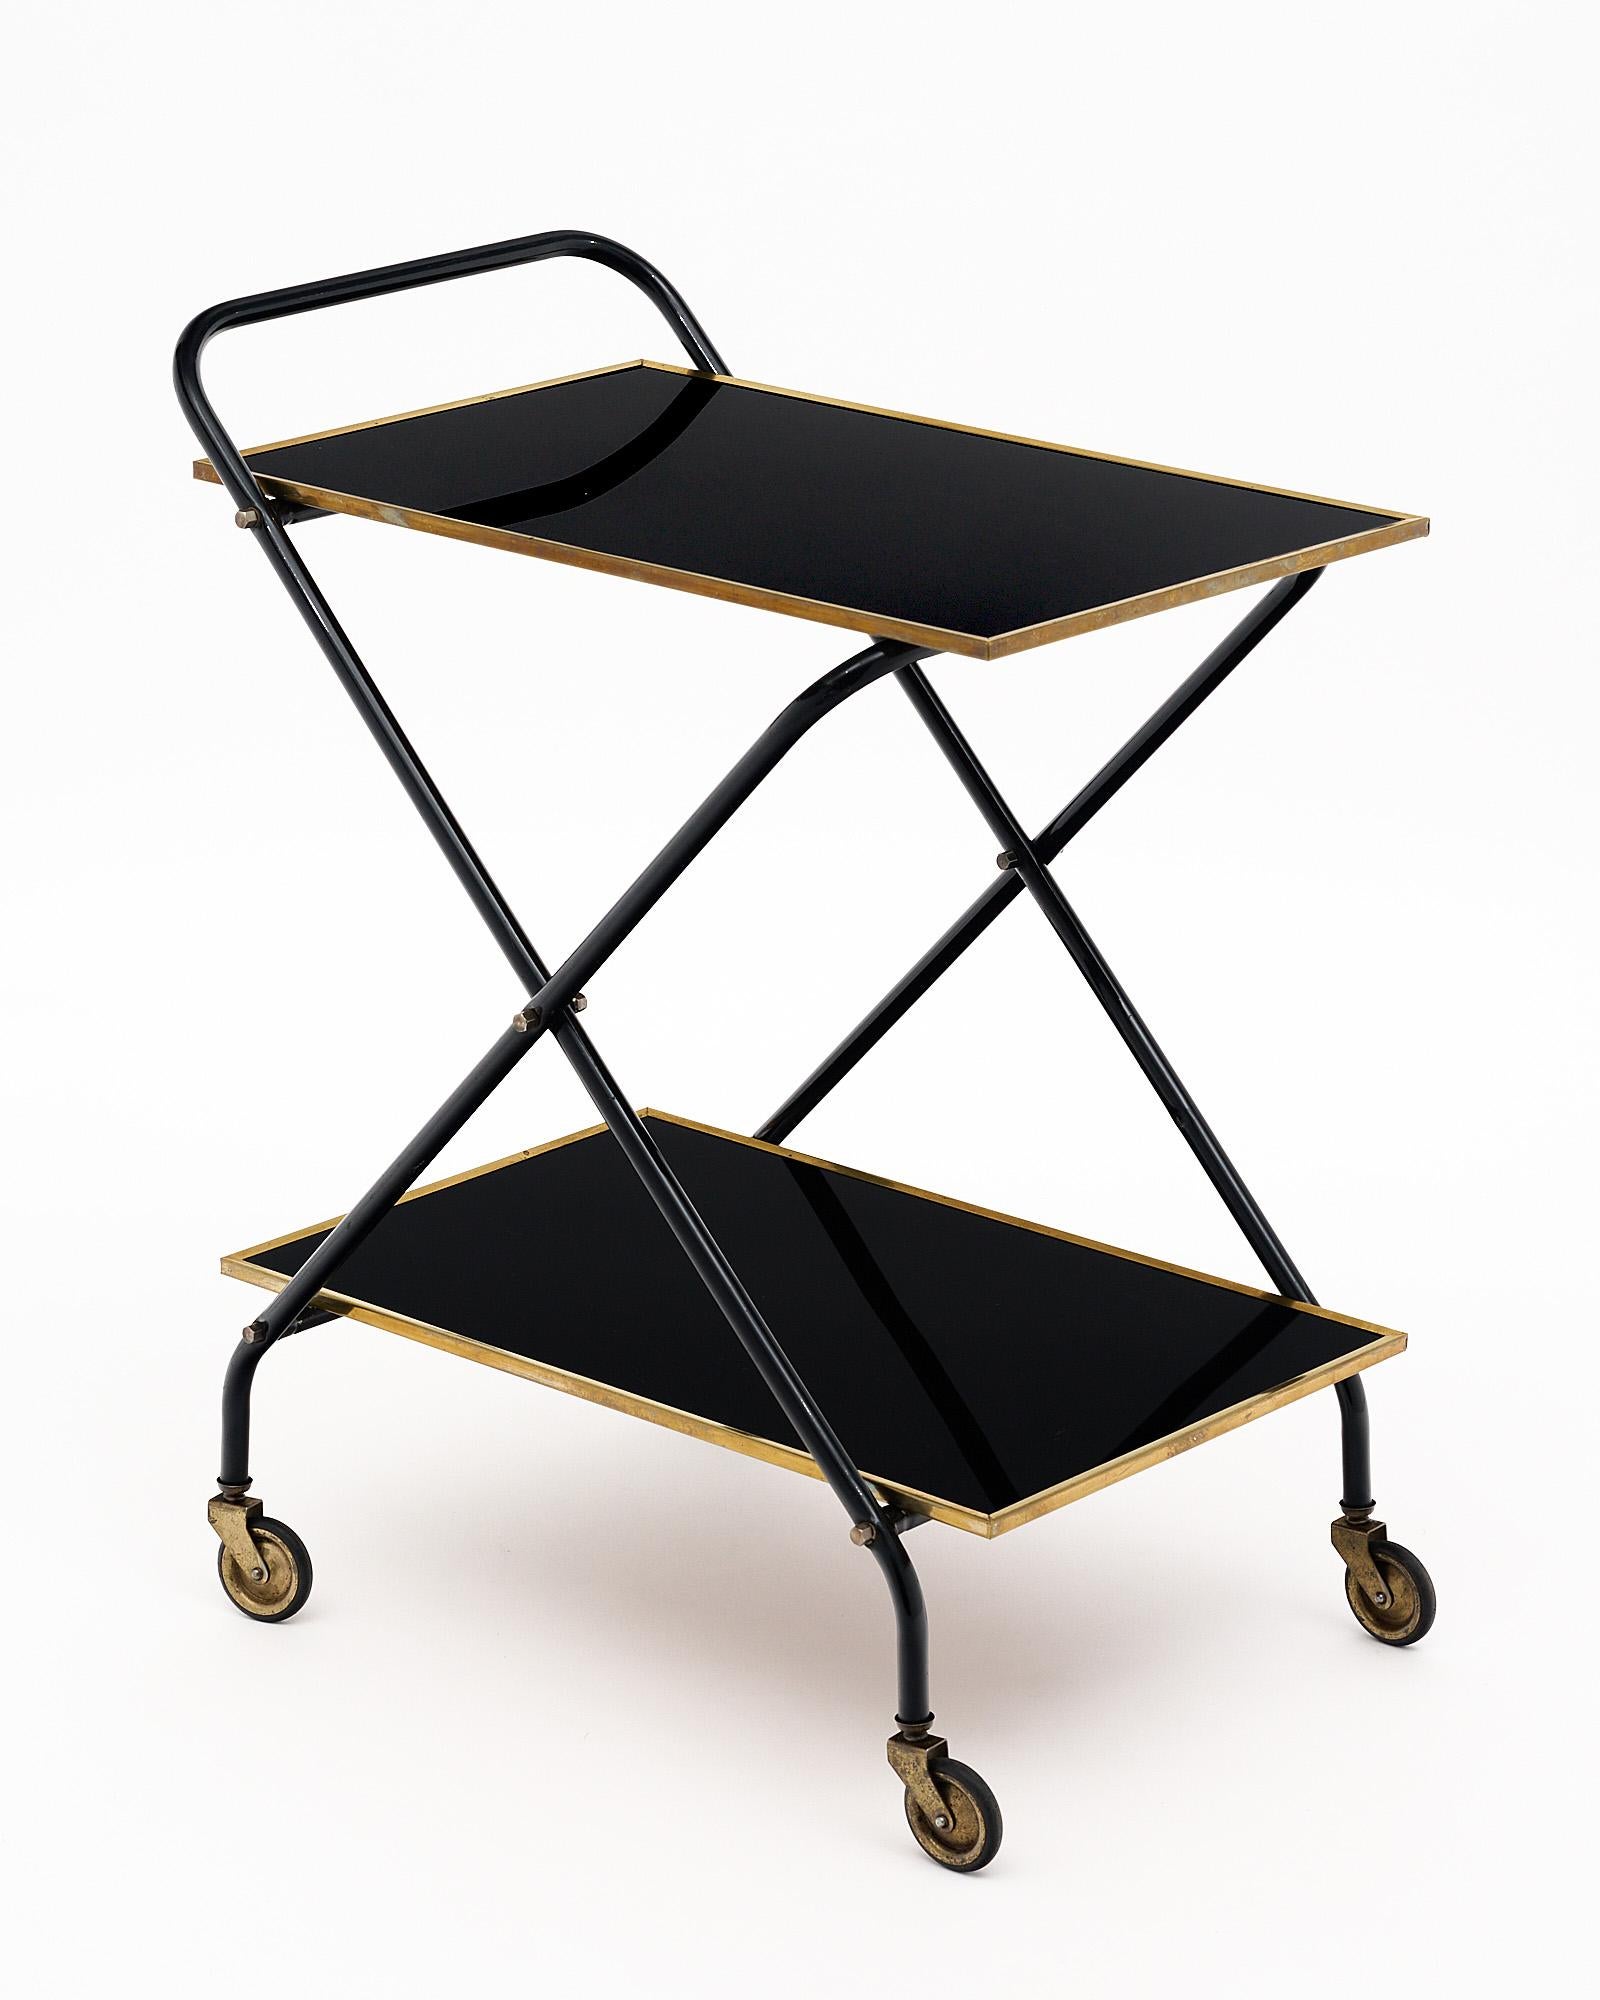 Vintage bar cart from France made with two shelves of black glass. Each shelf is trimmed with brass and the piece is supported by four original brass casters. The structure is black lacquered metal in a curule x shape.
